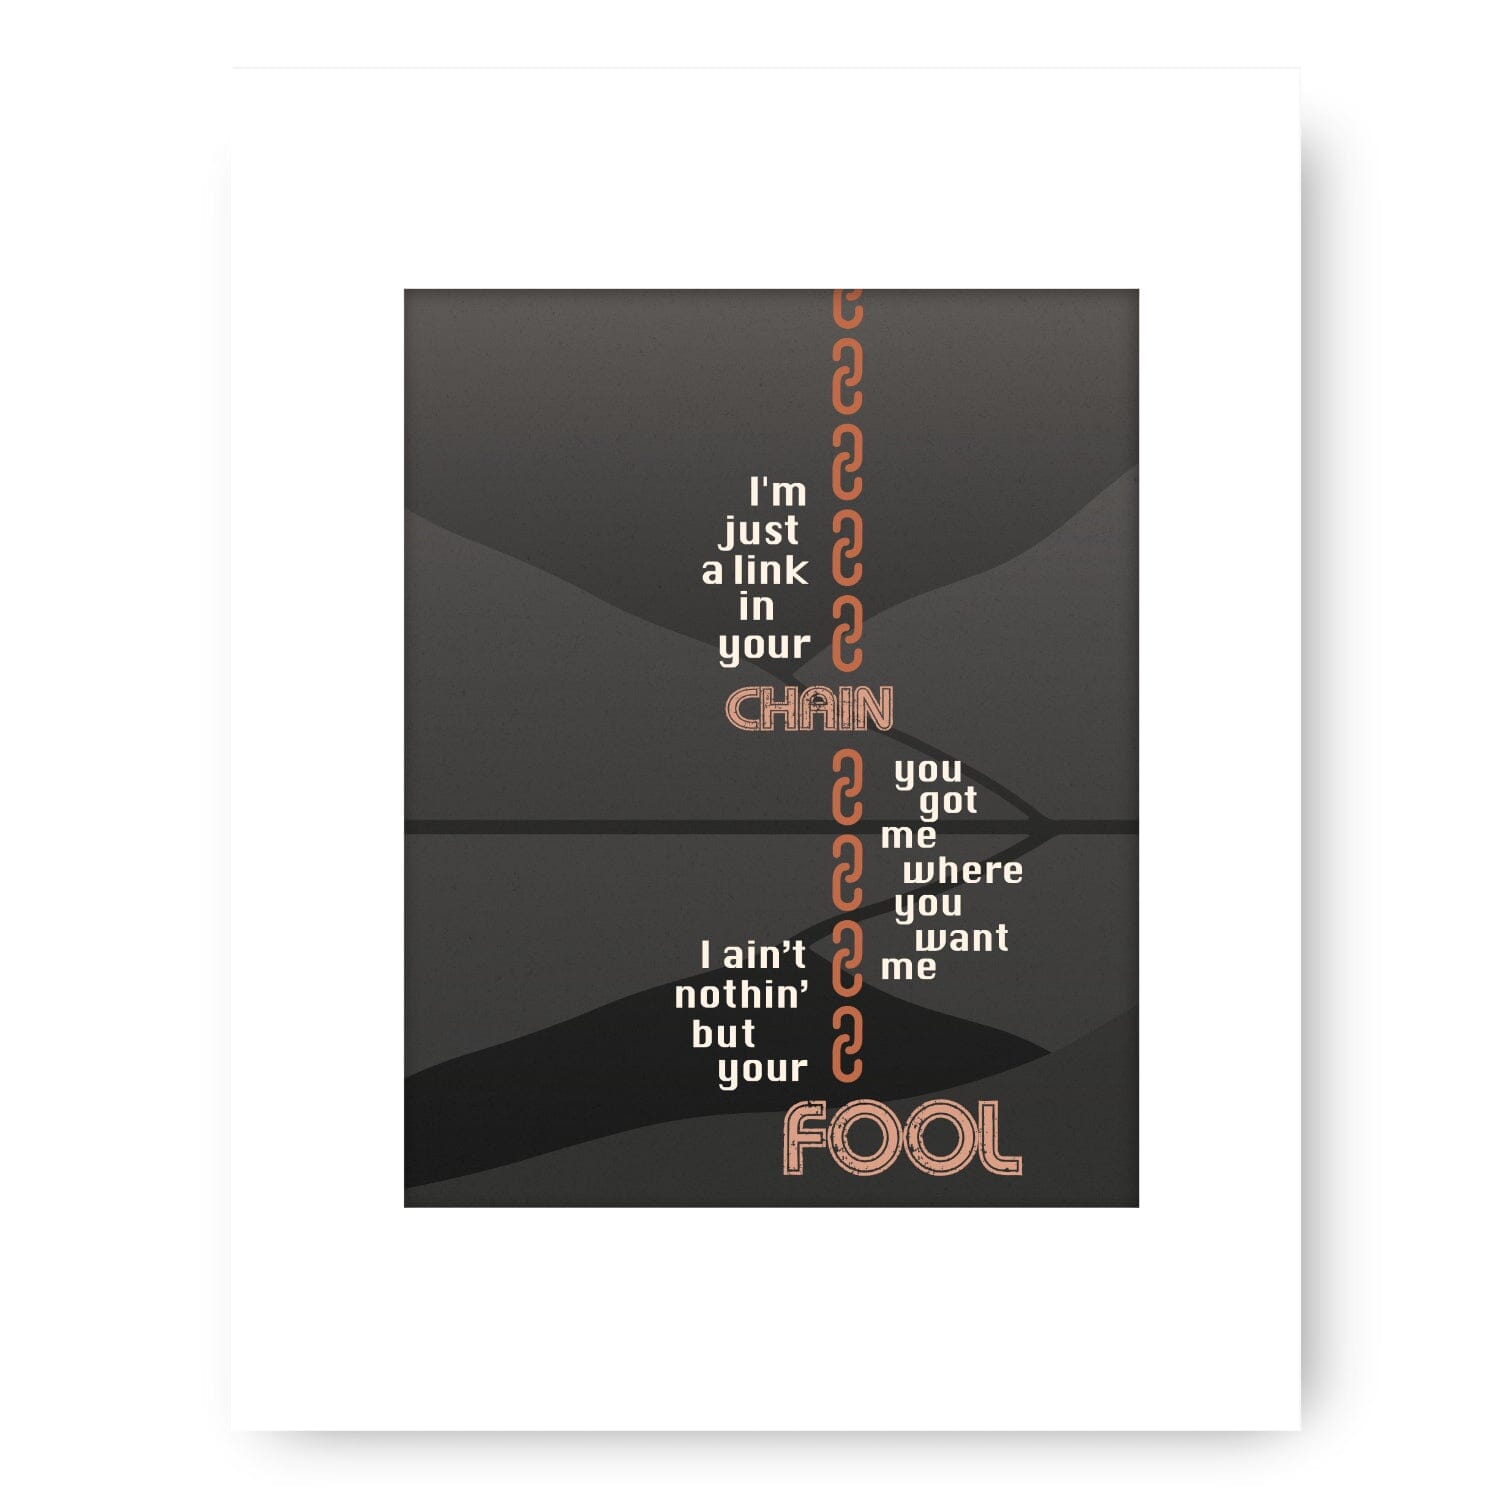 Chain of Fools by Aretha Franklin - Motown Music Lyric Art Song Lyrics Art Song Lyrics Art 8x10 White Mat Unframed Print 